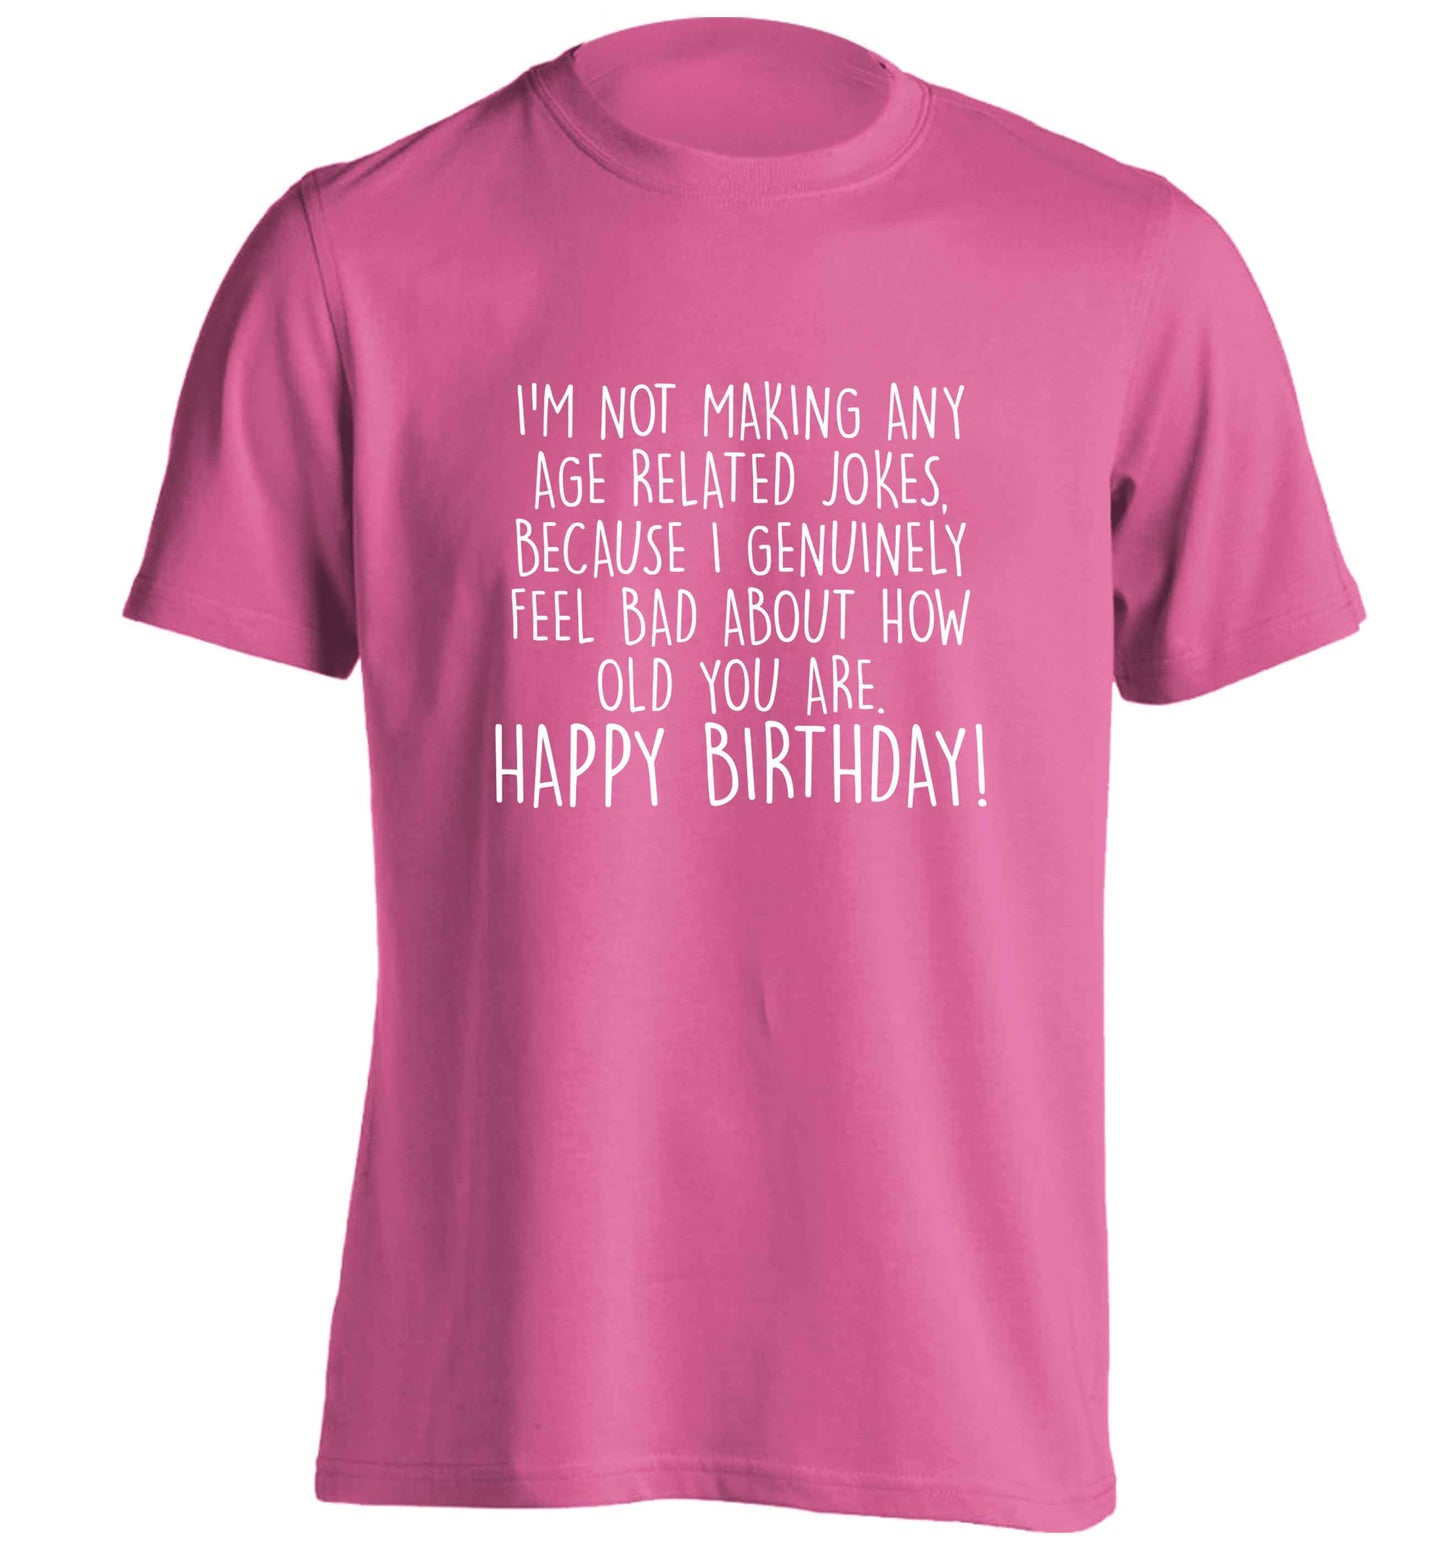 I'm not making any age related jokes because I genuinely feel bad for how old you are adults unisex pink Tshirt 2XL